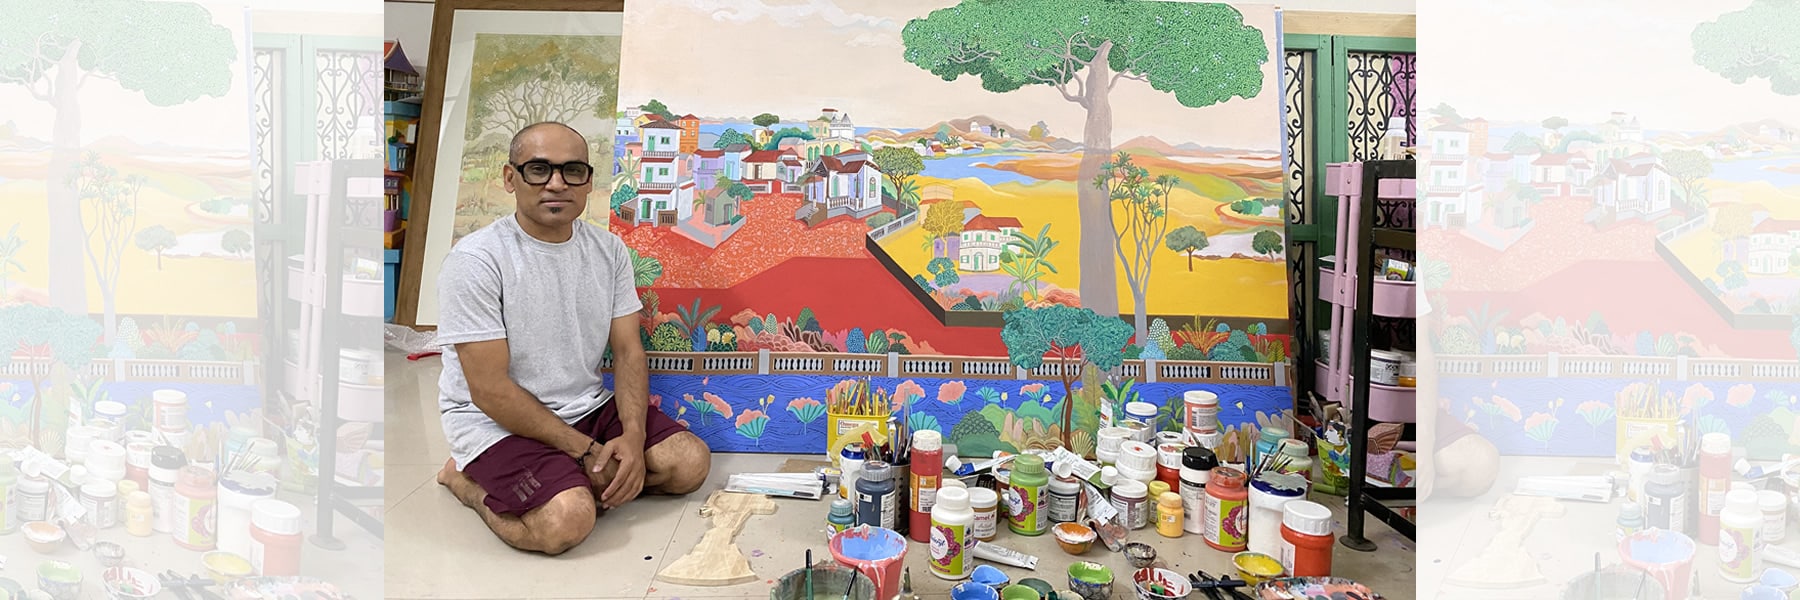 Interview with Contemporary Artist Sumanto Chowdhury